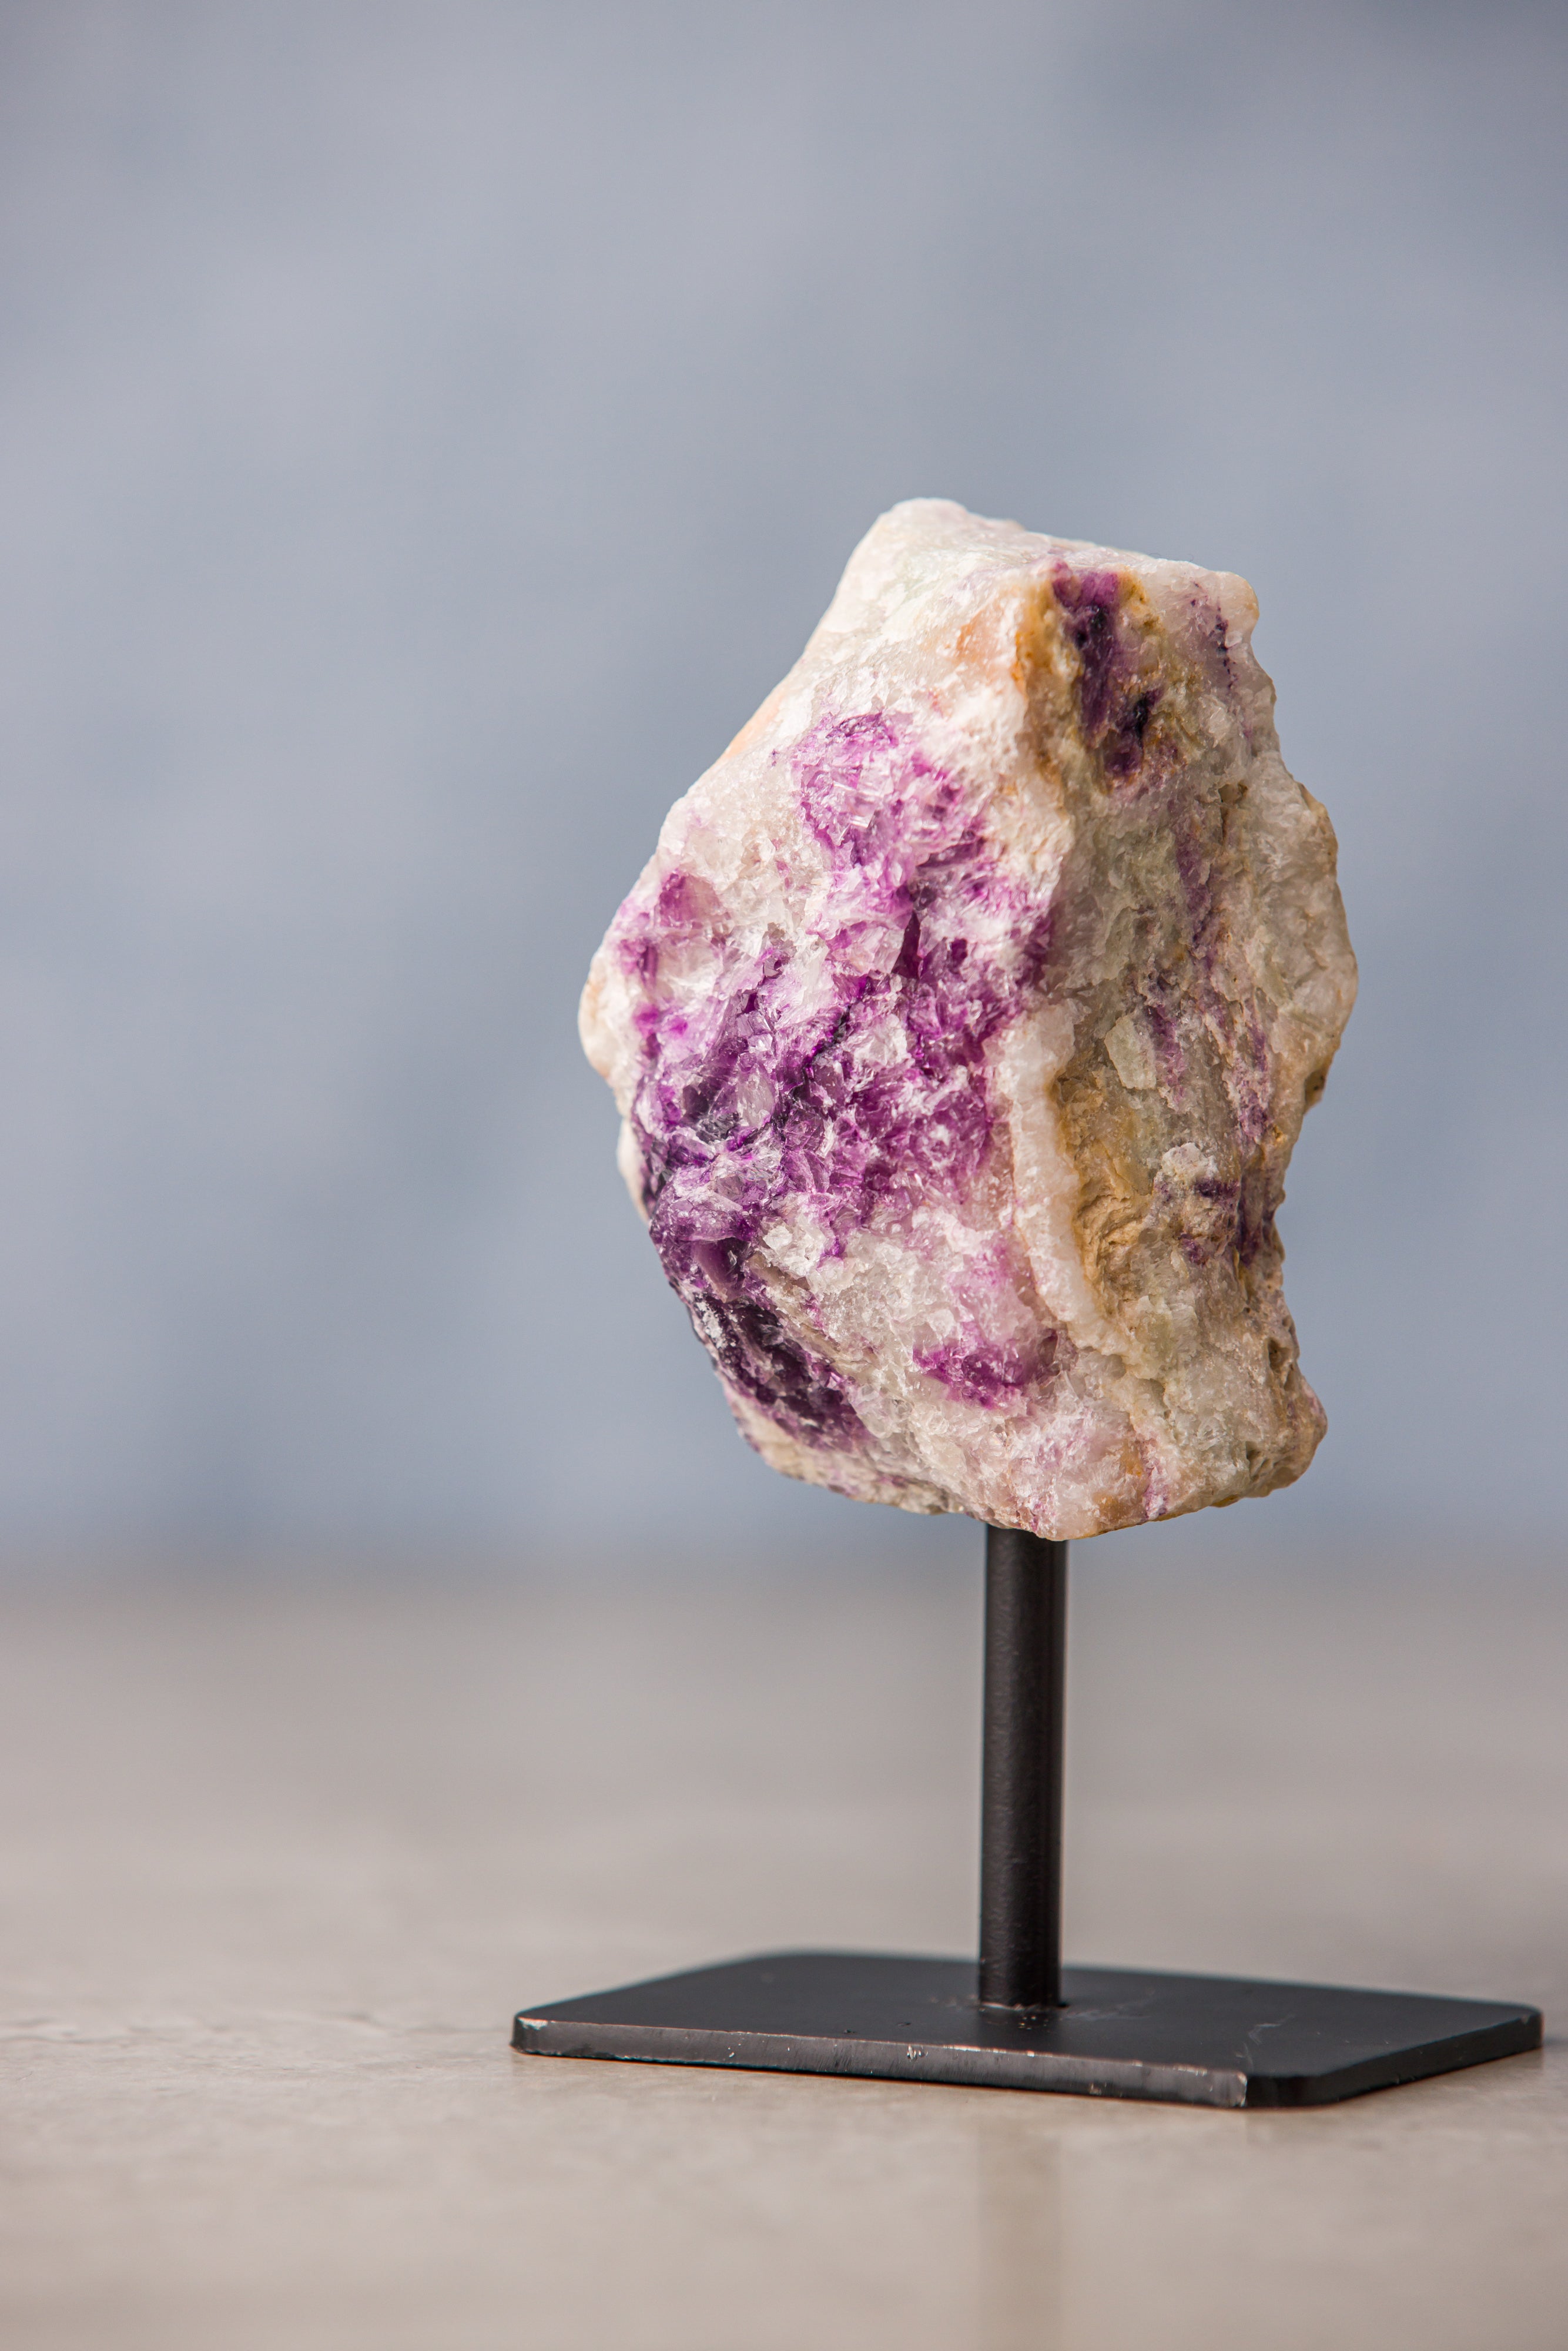 Small Fluorite Crystal on Stand - Versatile Display Piece for Mental Clarity &amp; Focus Product Description - Everyday Rocks